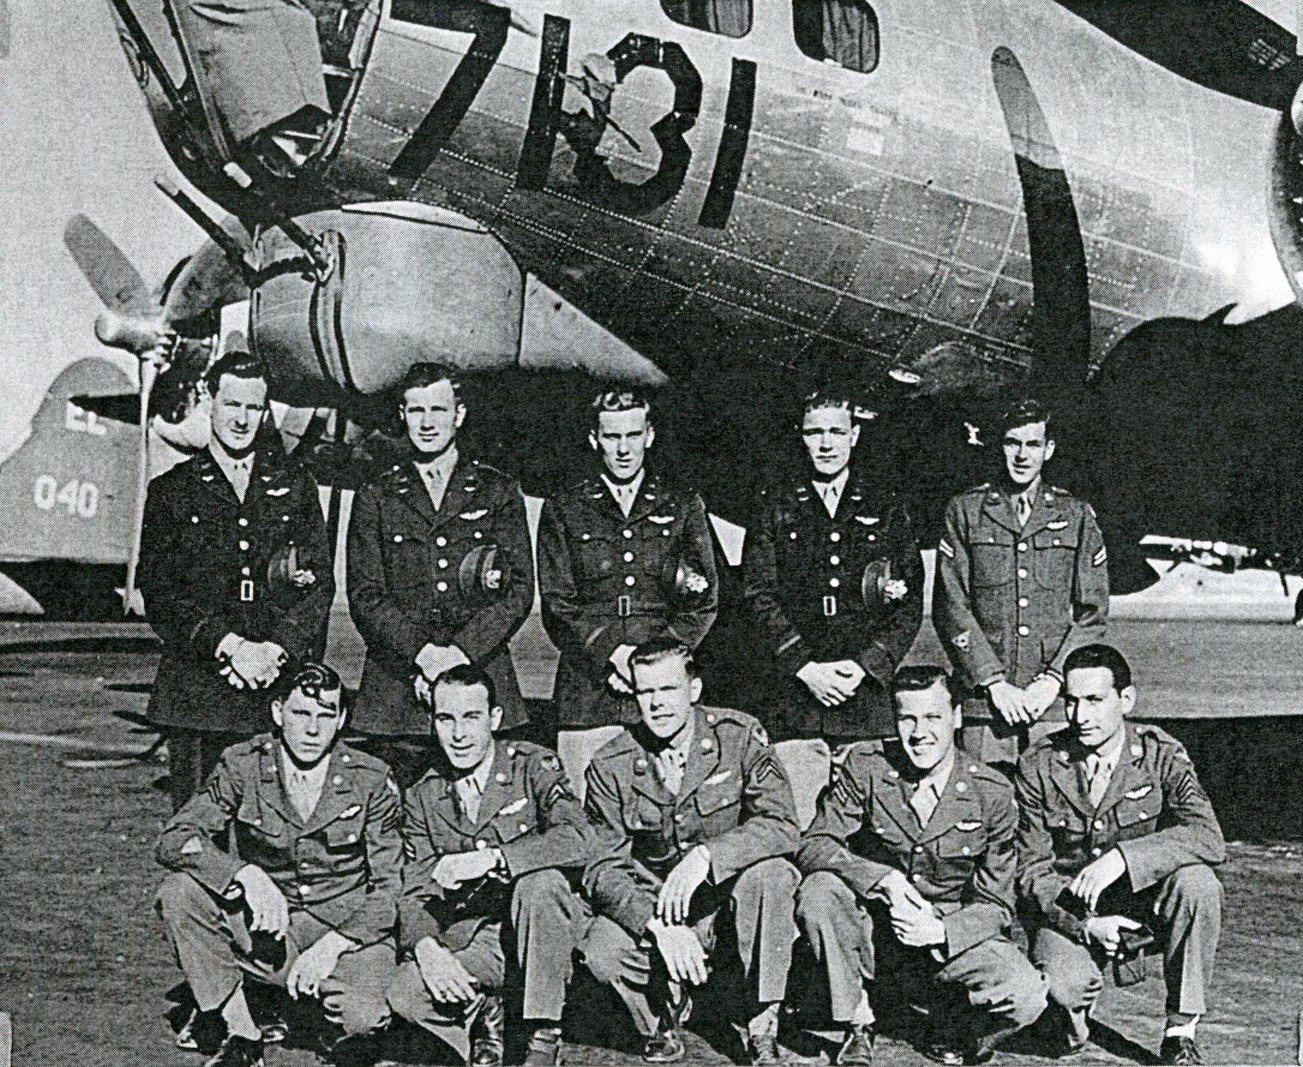 Agnew's Crew - 602nd Squadron - Probably Training Early 1945